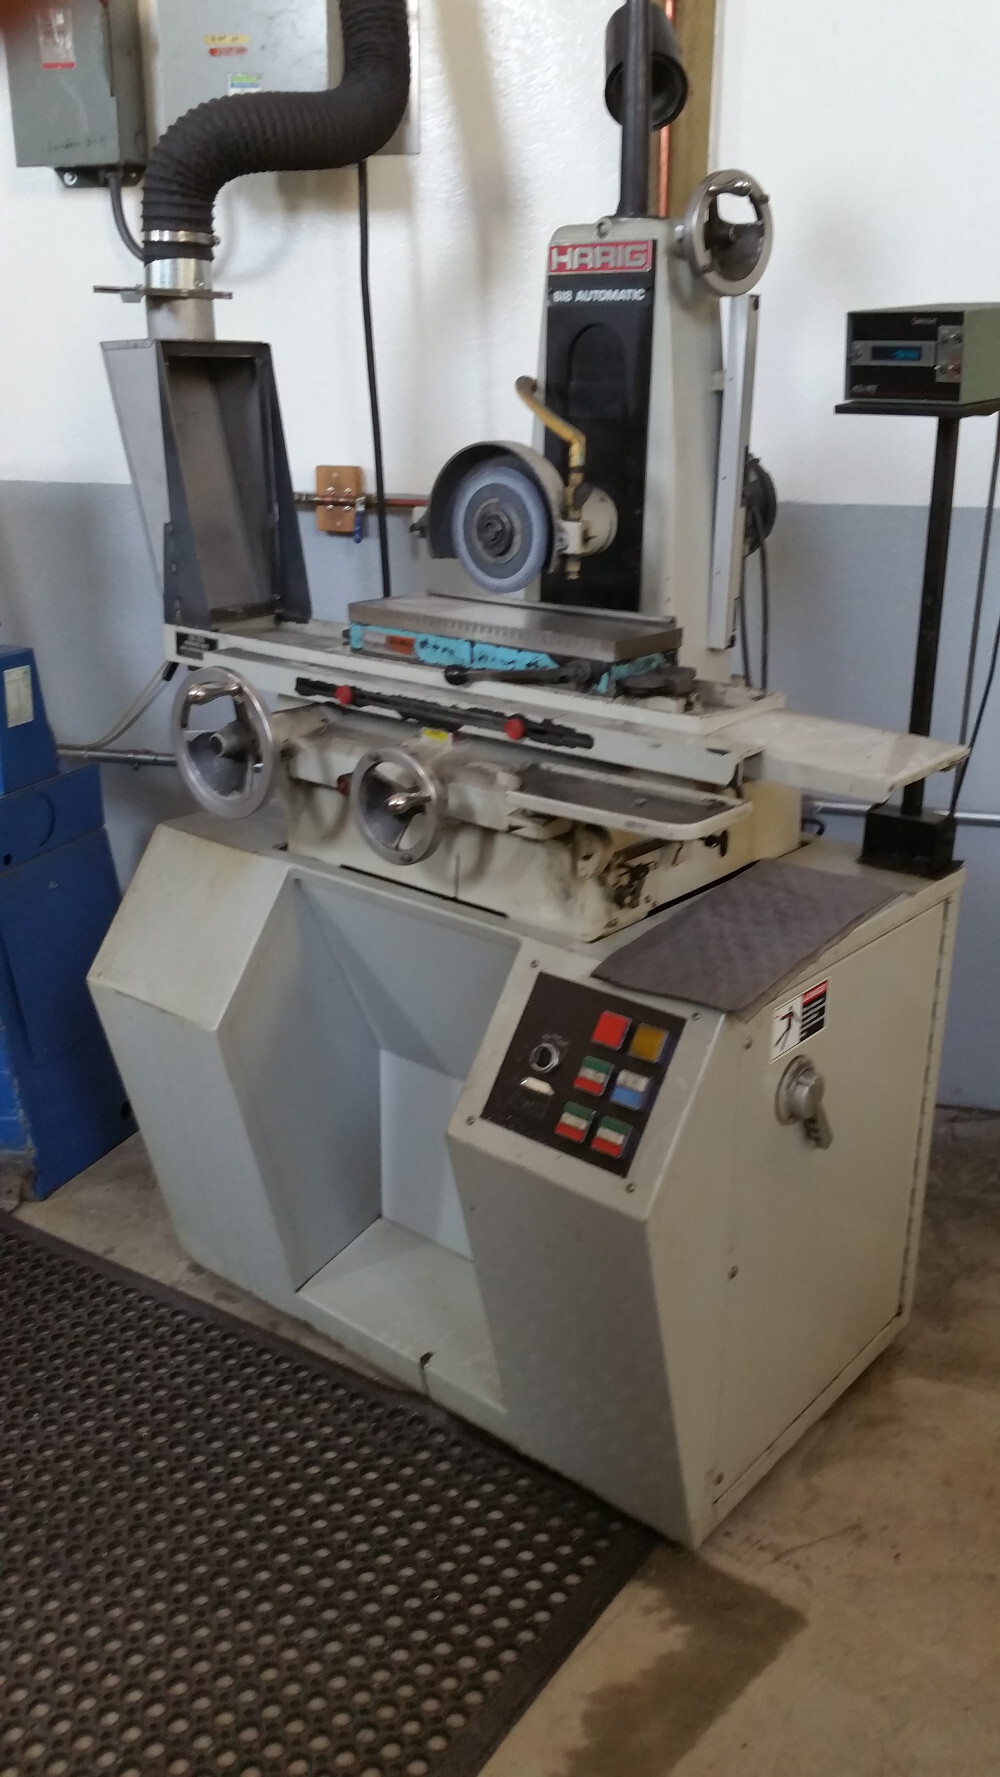 HARIG AUTOMATIC 618 Sold Equipment | MD Equipment Services LLC